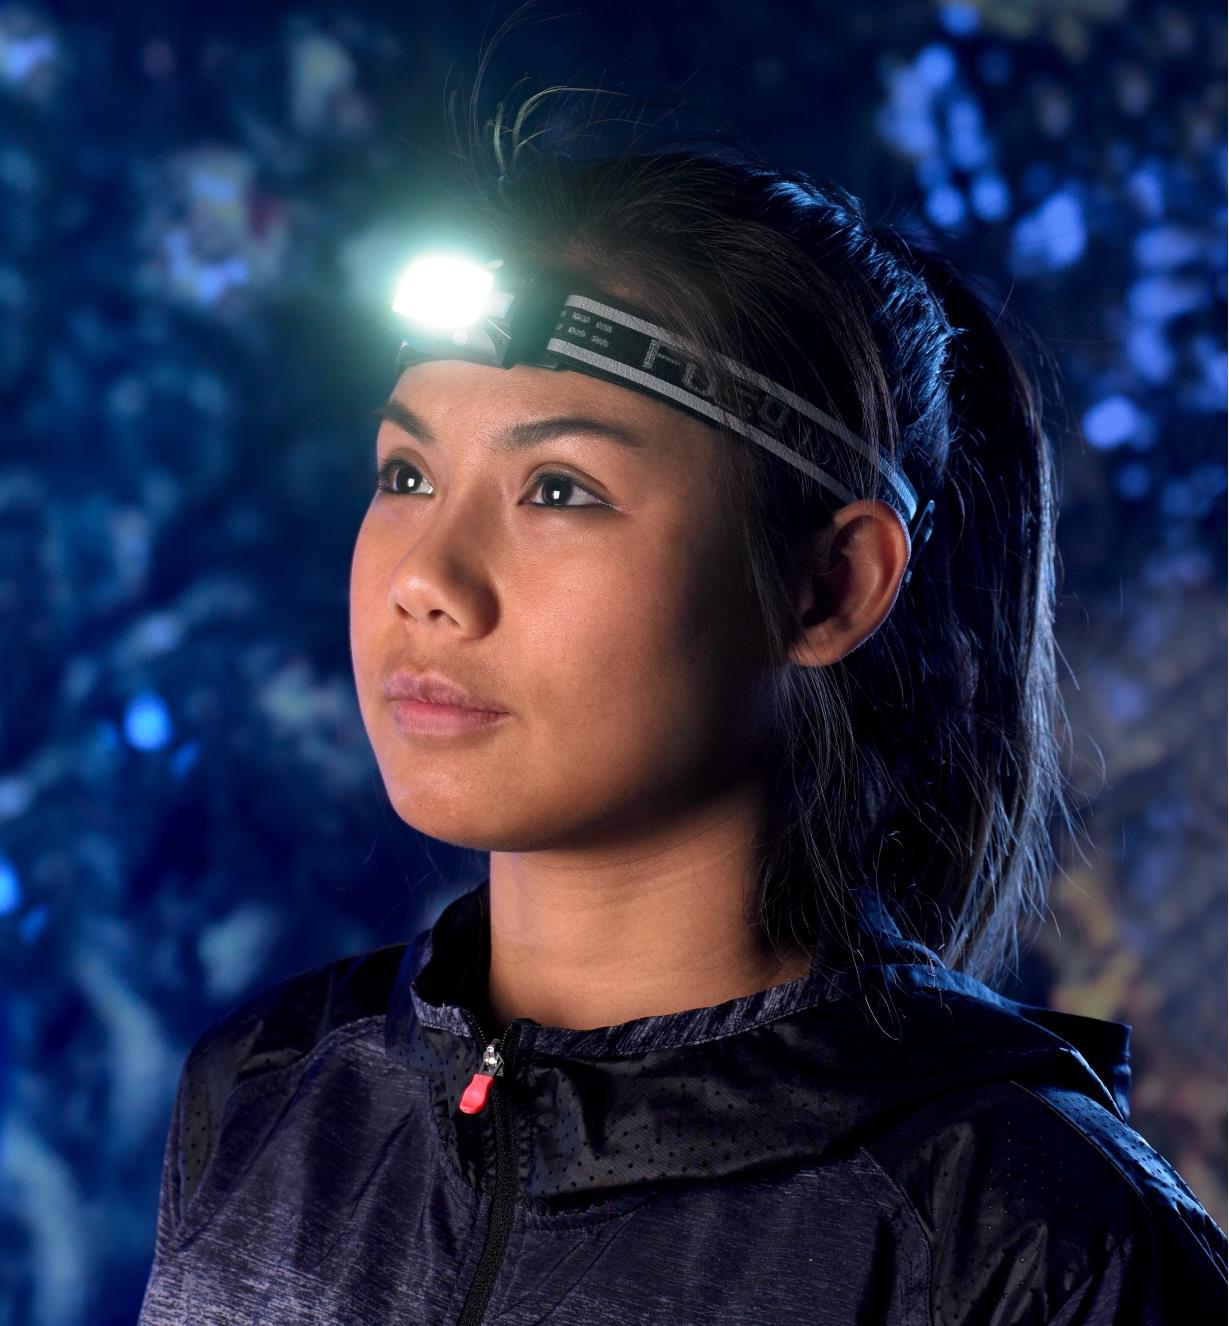 Attached to a headband, the multi-function LED headlamp is positioned on the forehead